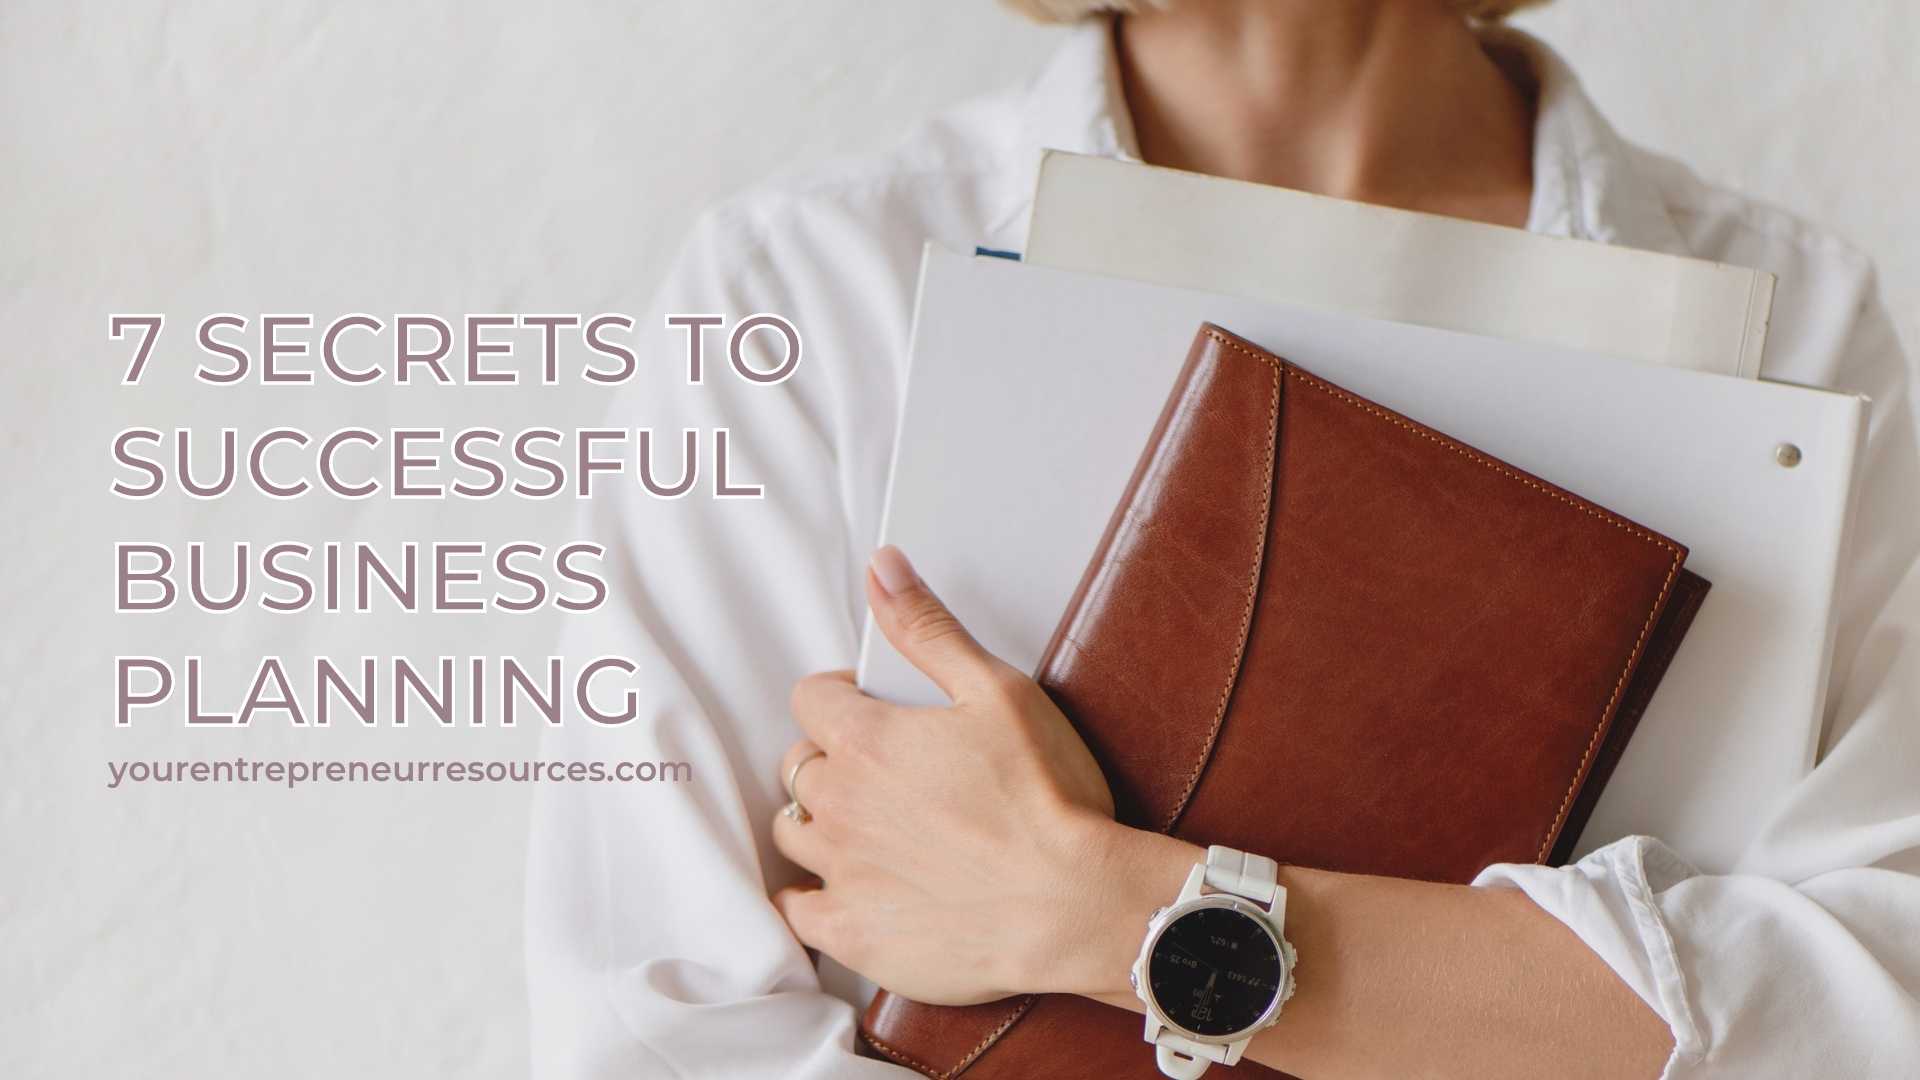 7 Secrets to Successful Business Planning & What it can do for your business